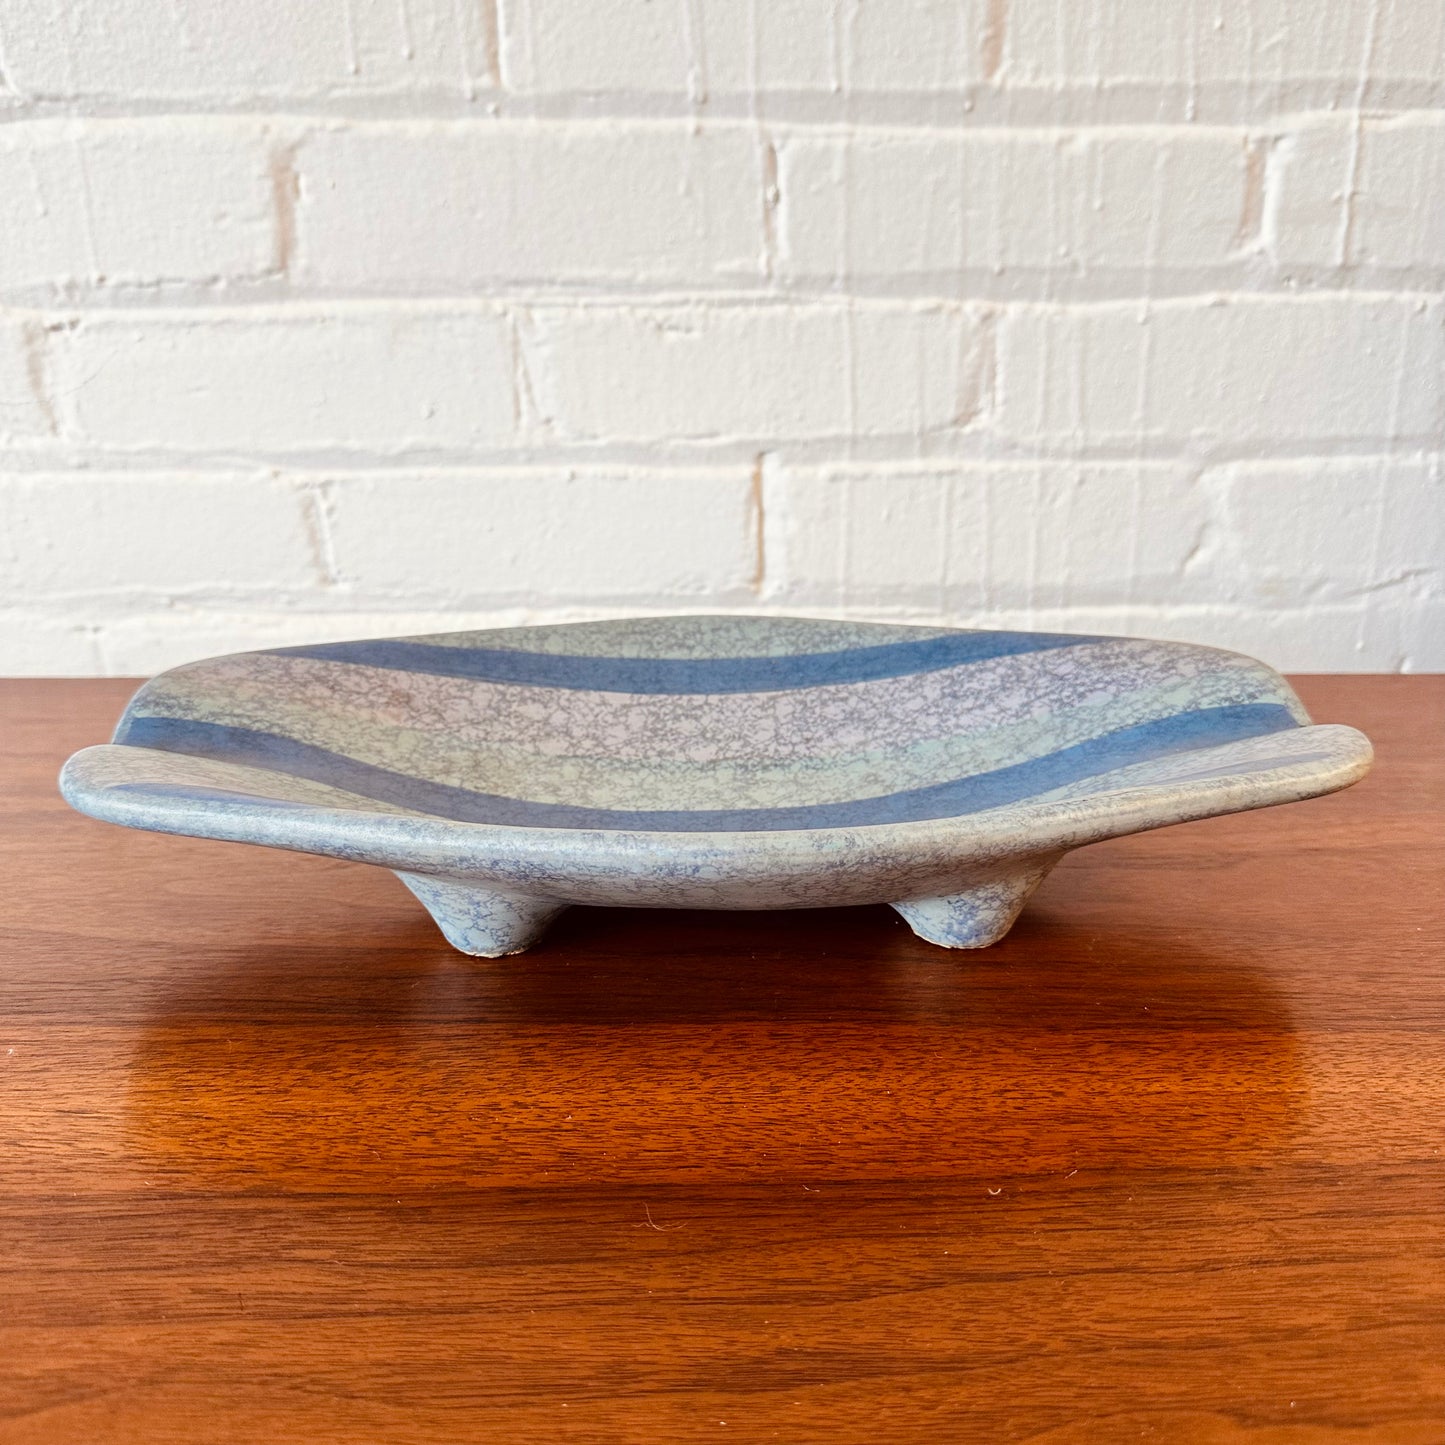 PASTEL POTTERY CATCHALL BOWL BY MADELINE ORIGINALS